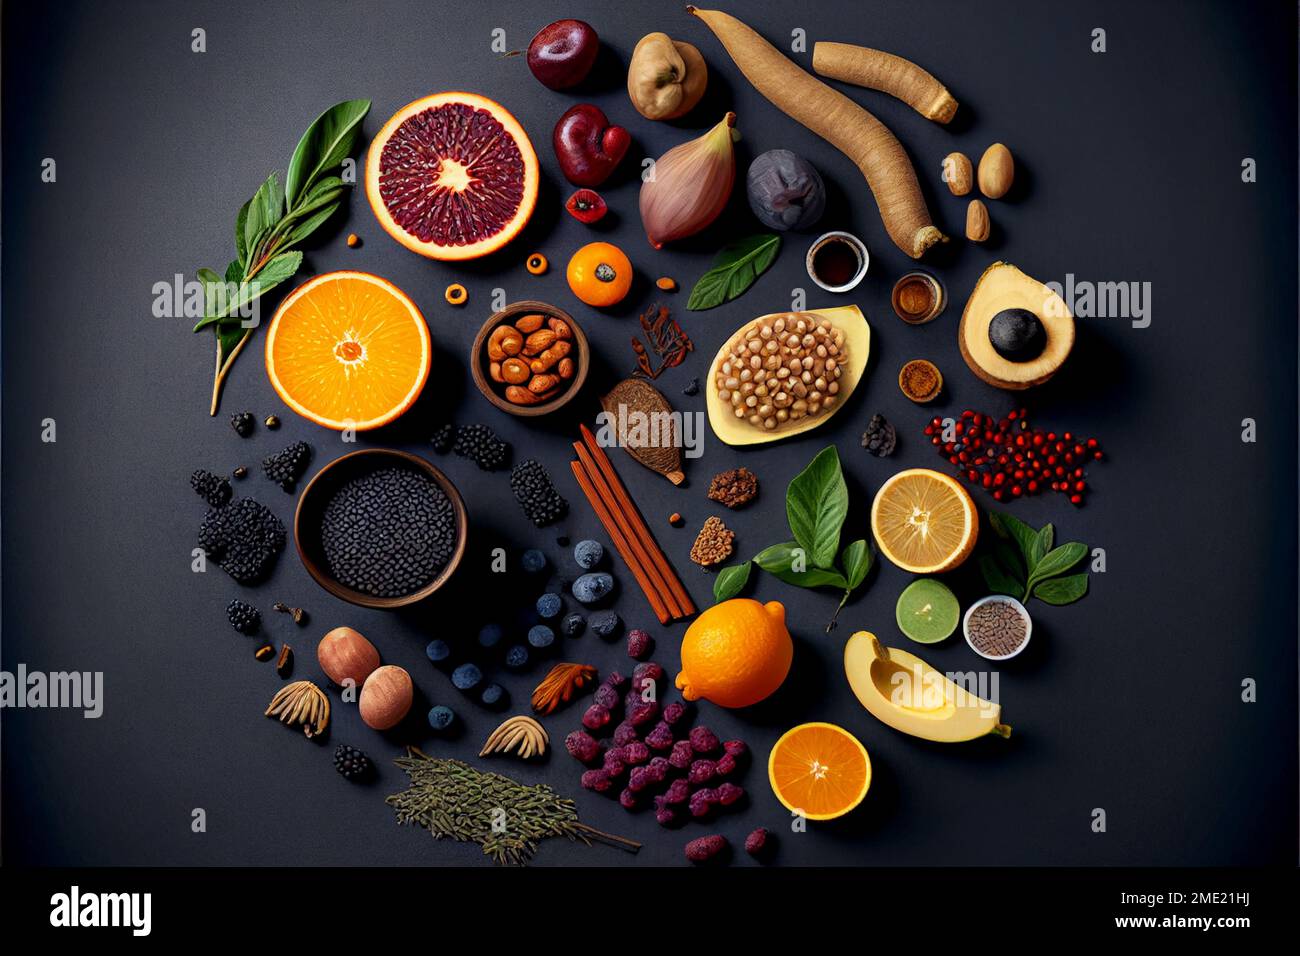 Healthy food clean eating selection: fruit, vegetable, seeds, superfood,  cereal, leaf vegetable on gray concrete background Stock Photo - Alamy